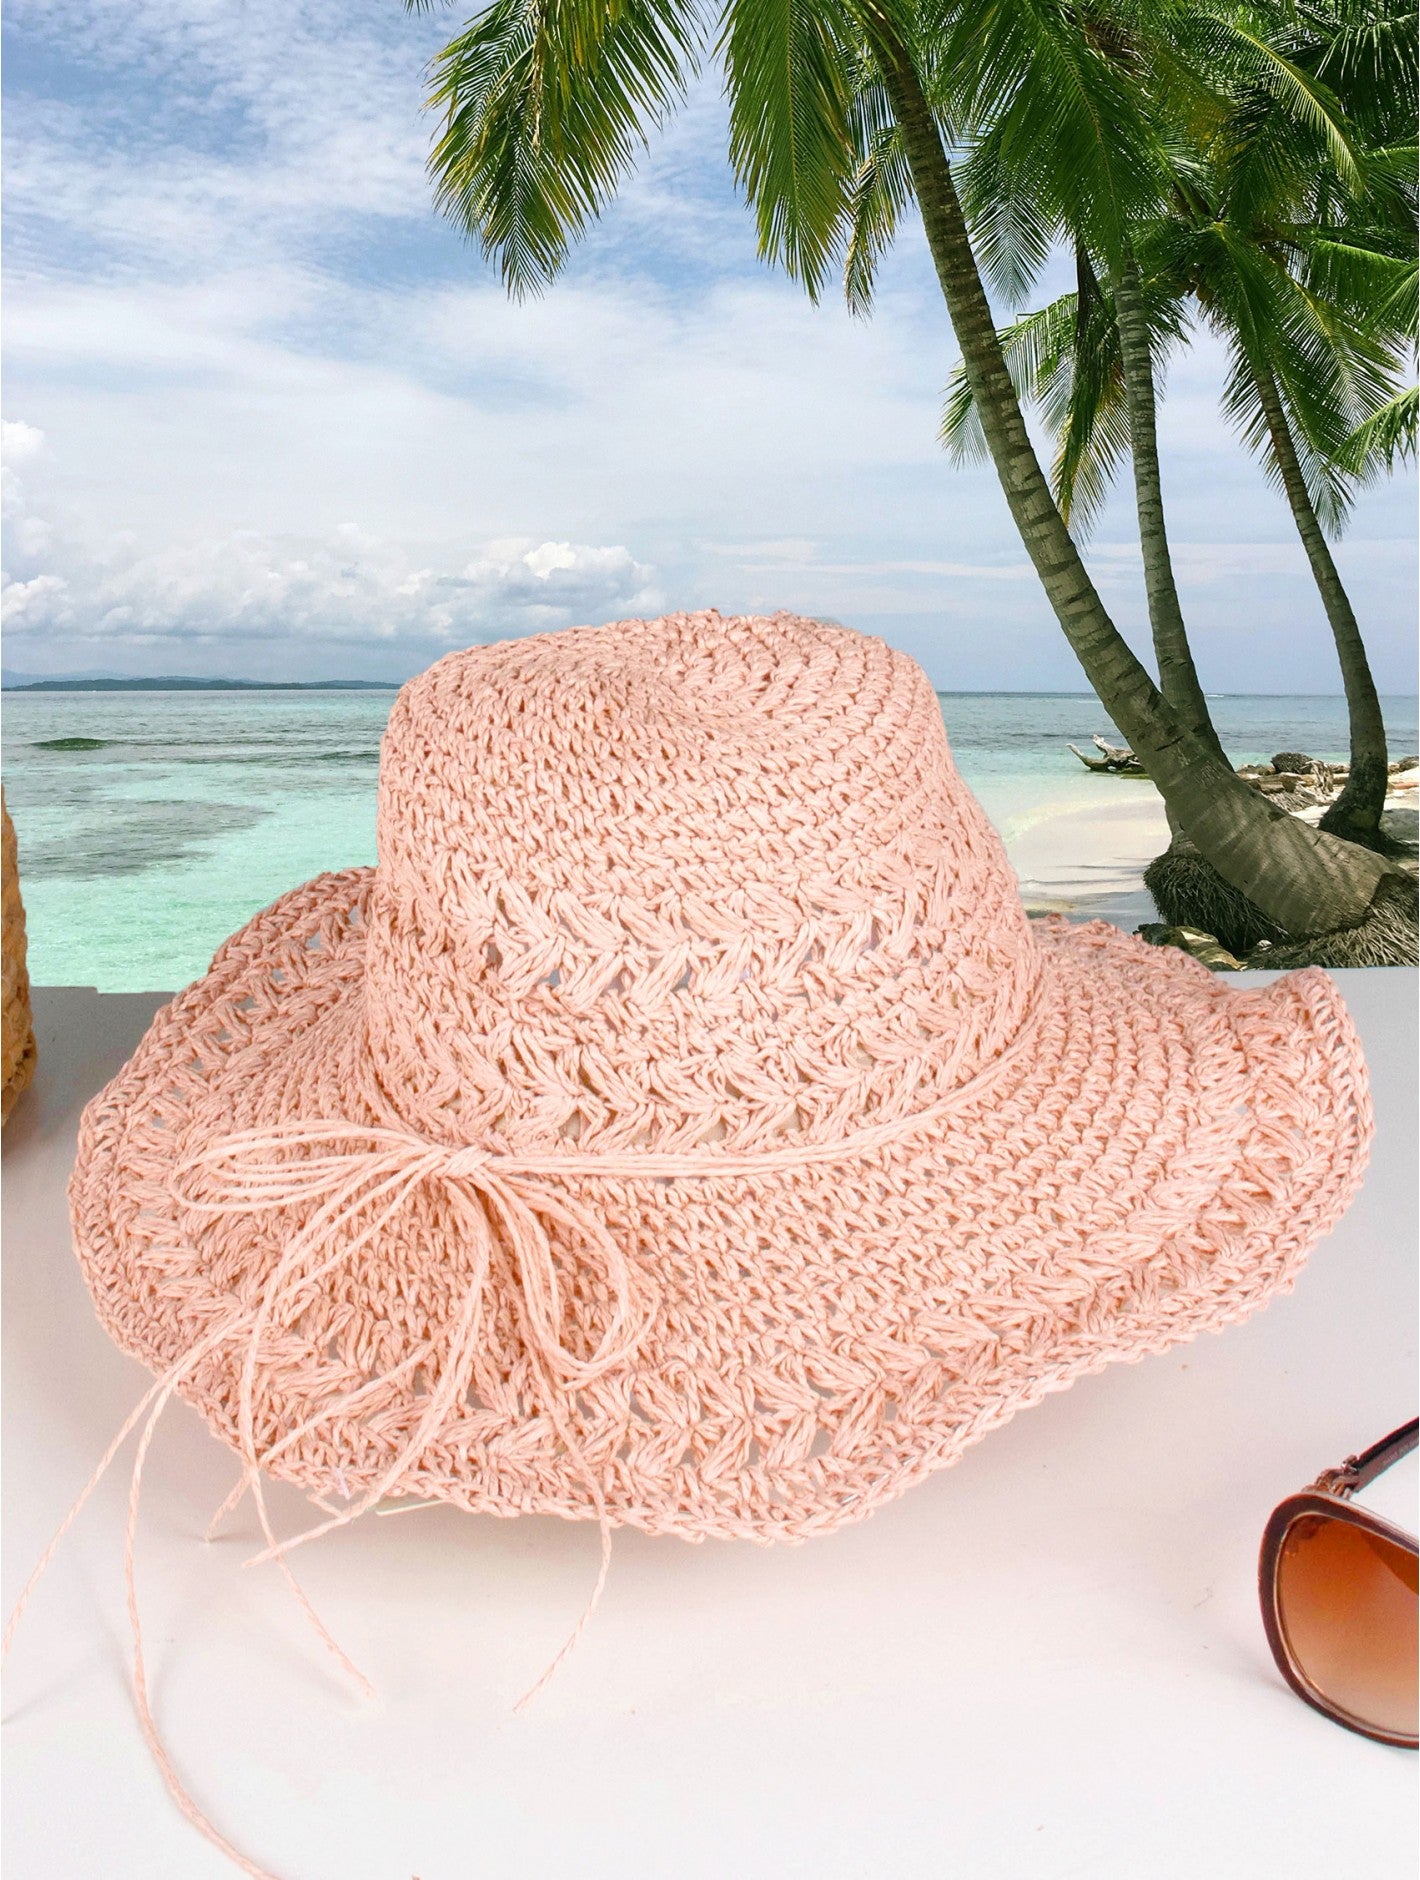 A woven pink hat with pink string bow is shown on a beach backdrop.